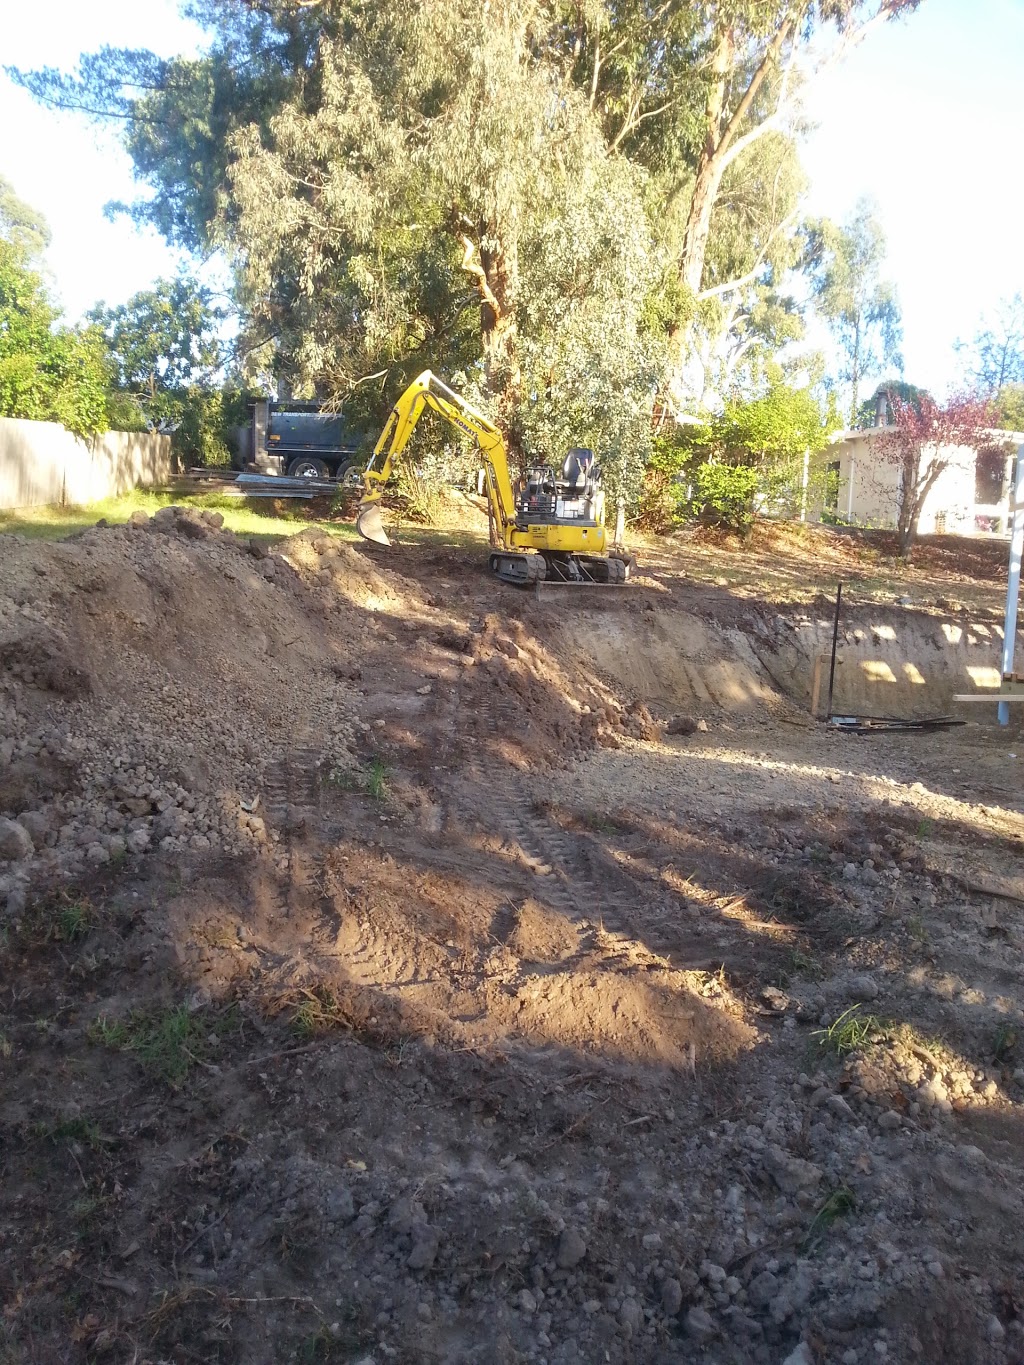 Just Excavate | general contractor | 12 Barrett St, Upper Ferntree Gully VIC 3156, Australia | 0424432144 OR +61 424 432 144